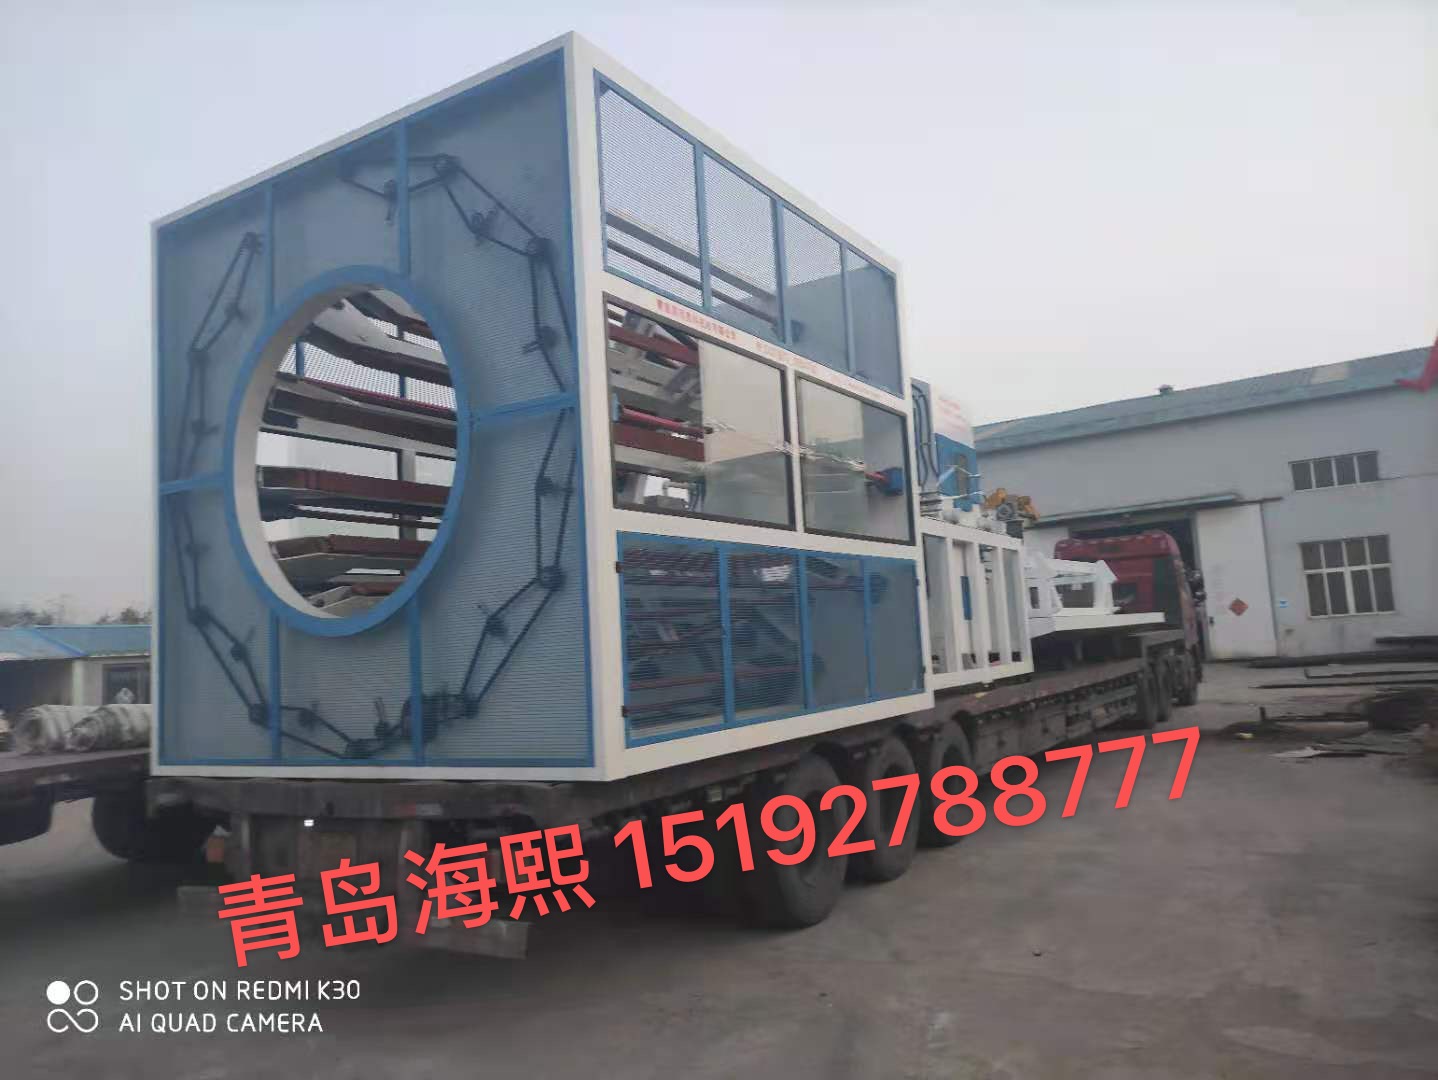 The second vehicle of Henan Ziliang Pipeline Manufacturing Co., Ltd.